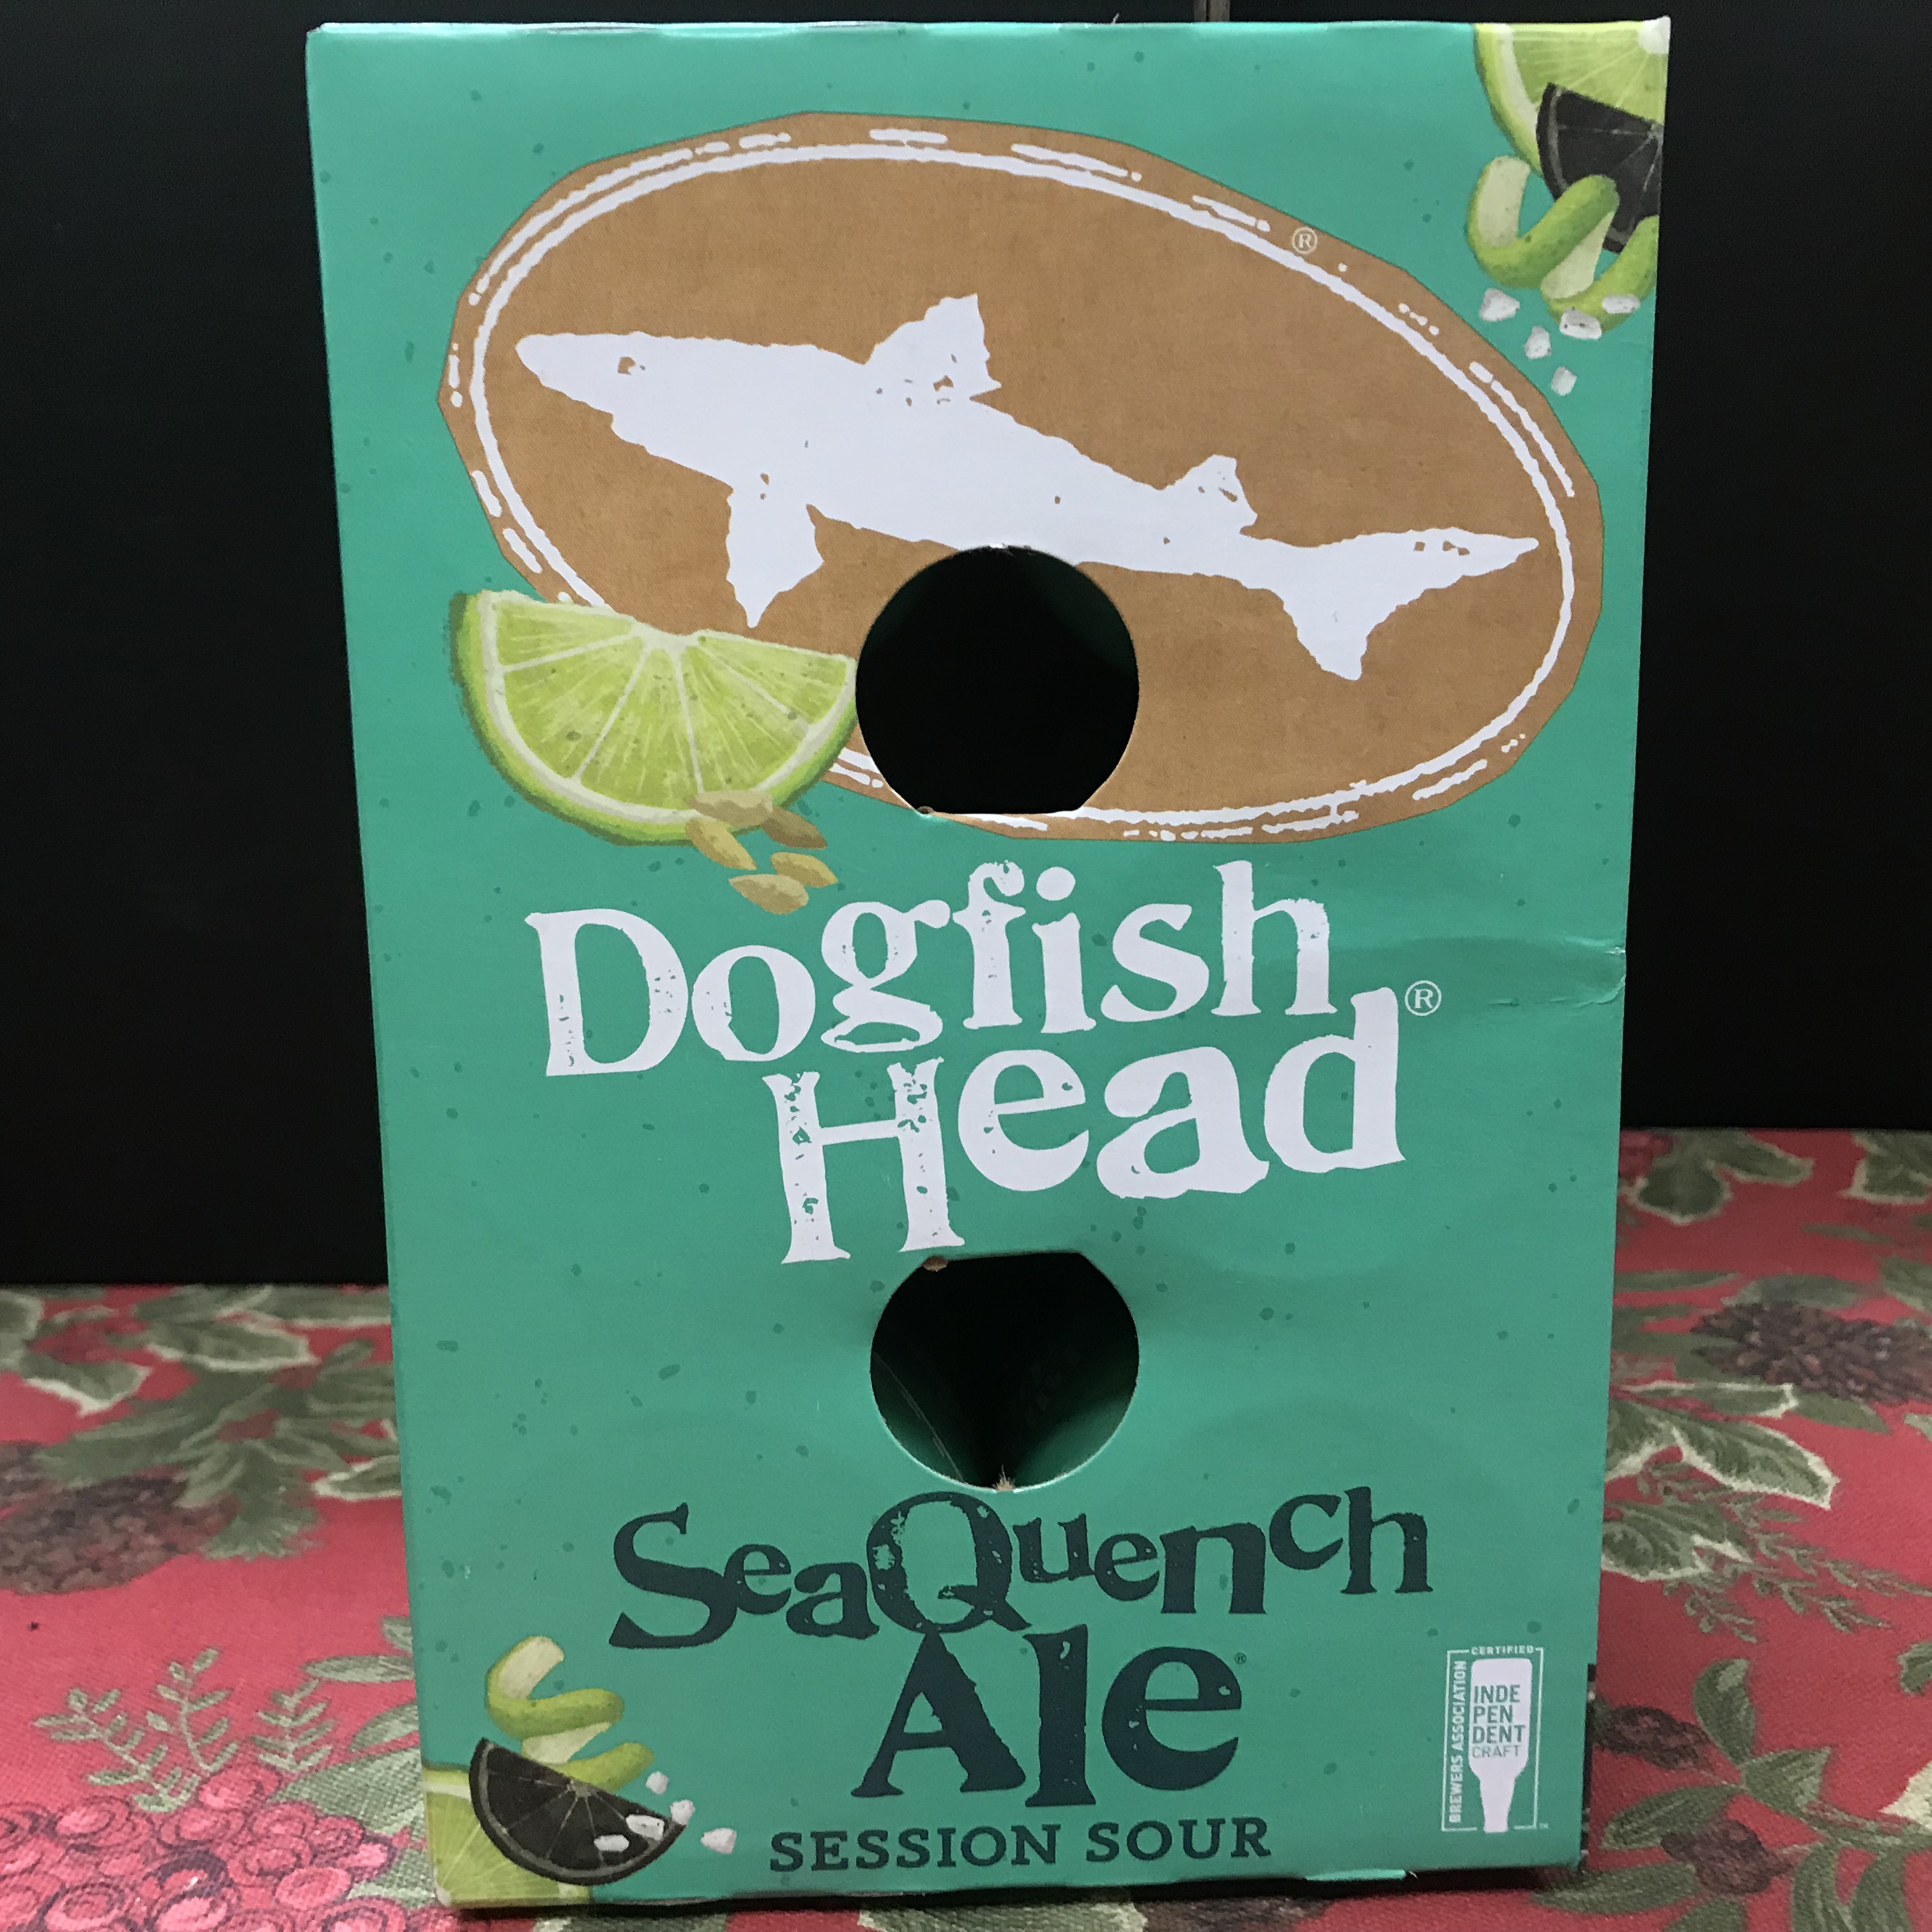 Dogfish Head SeaQuench Session Sour Ale 6 x 12oz cans